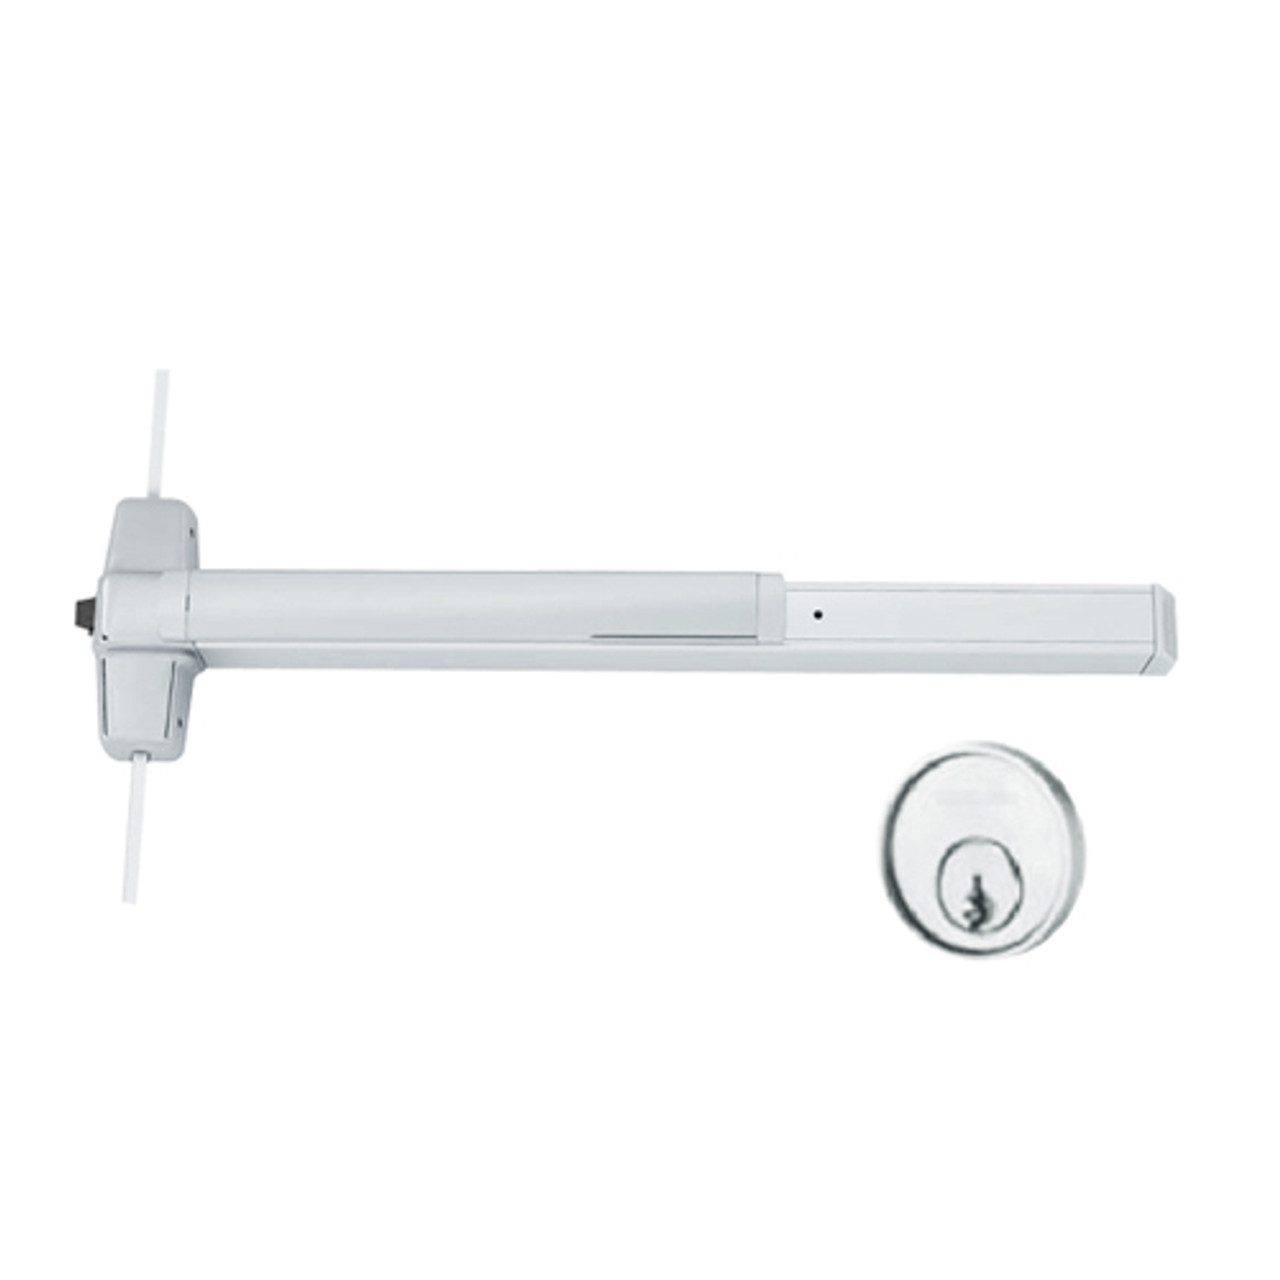 9957NL-OP-F-US28-4 Von Duprin Exit Device in Anodized Aluminum